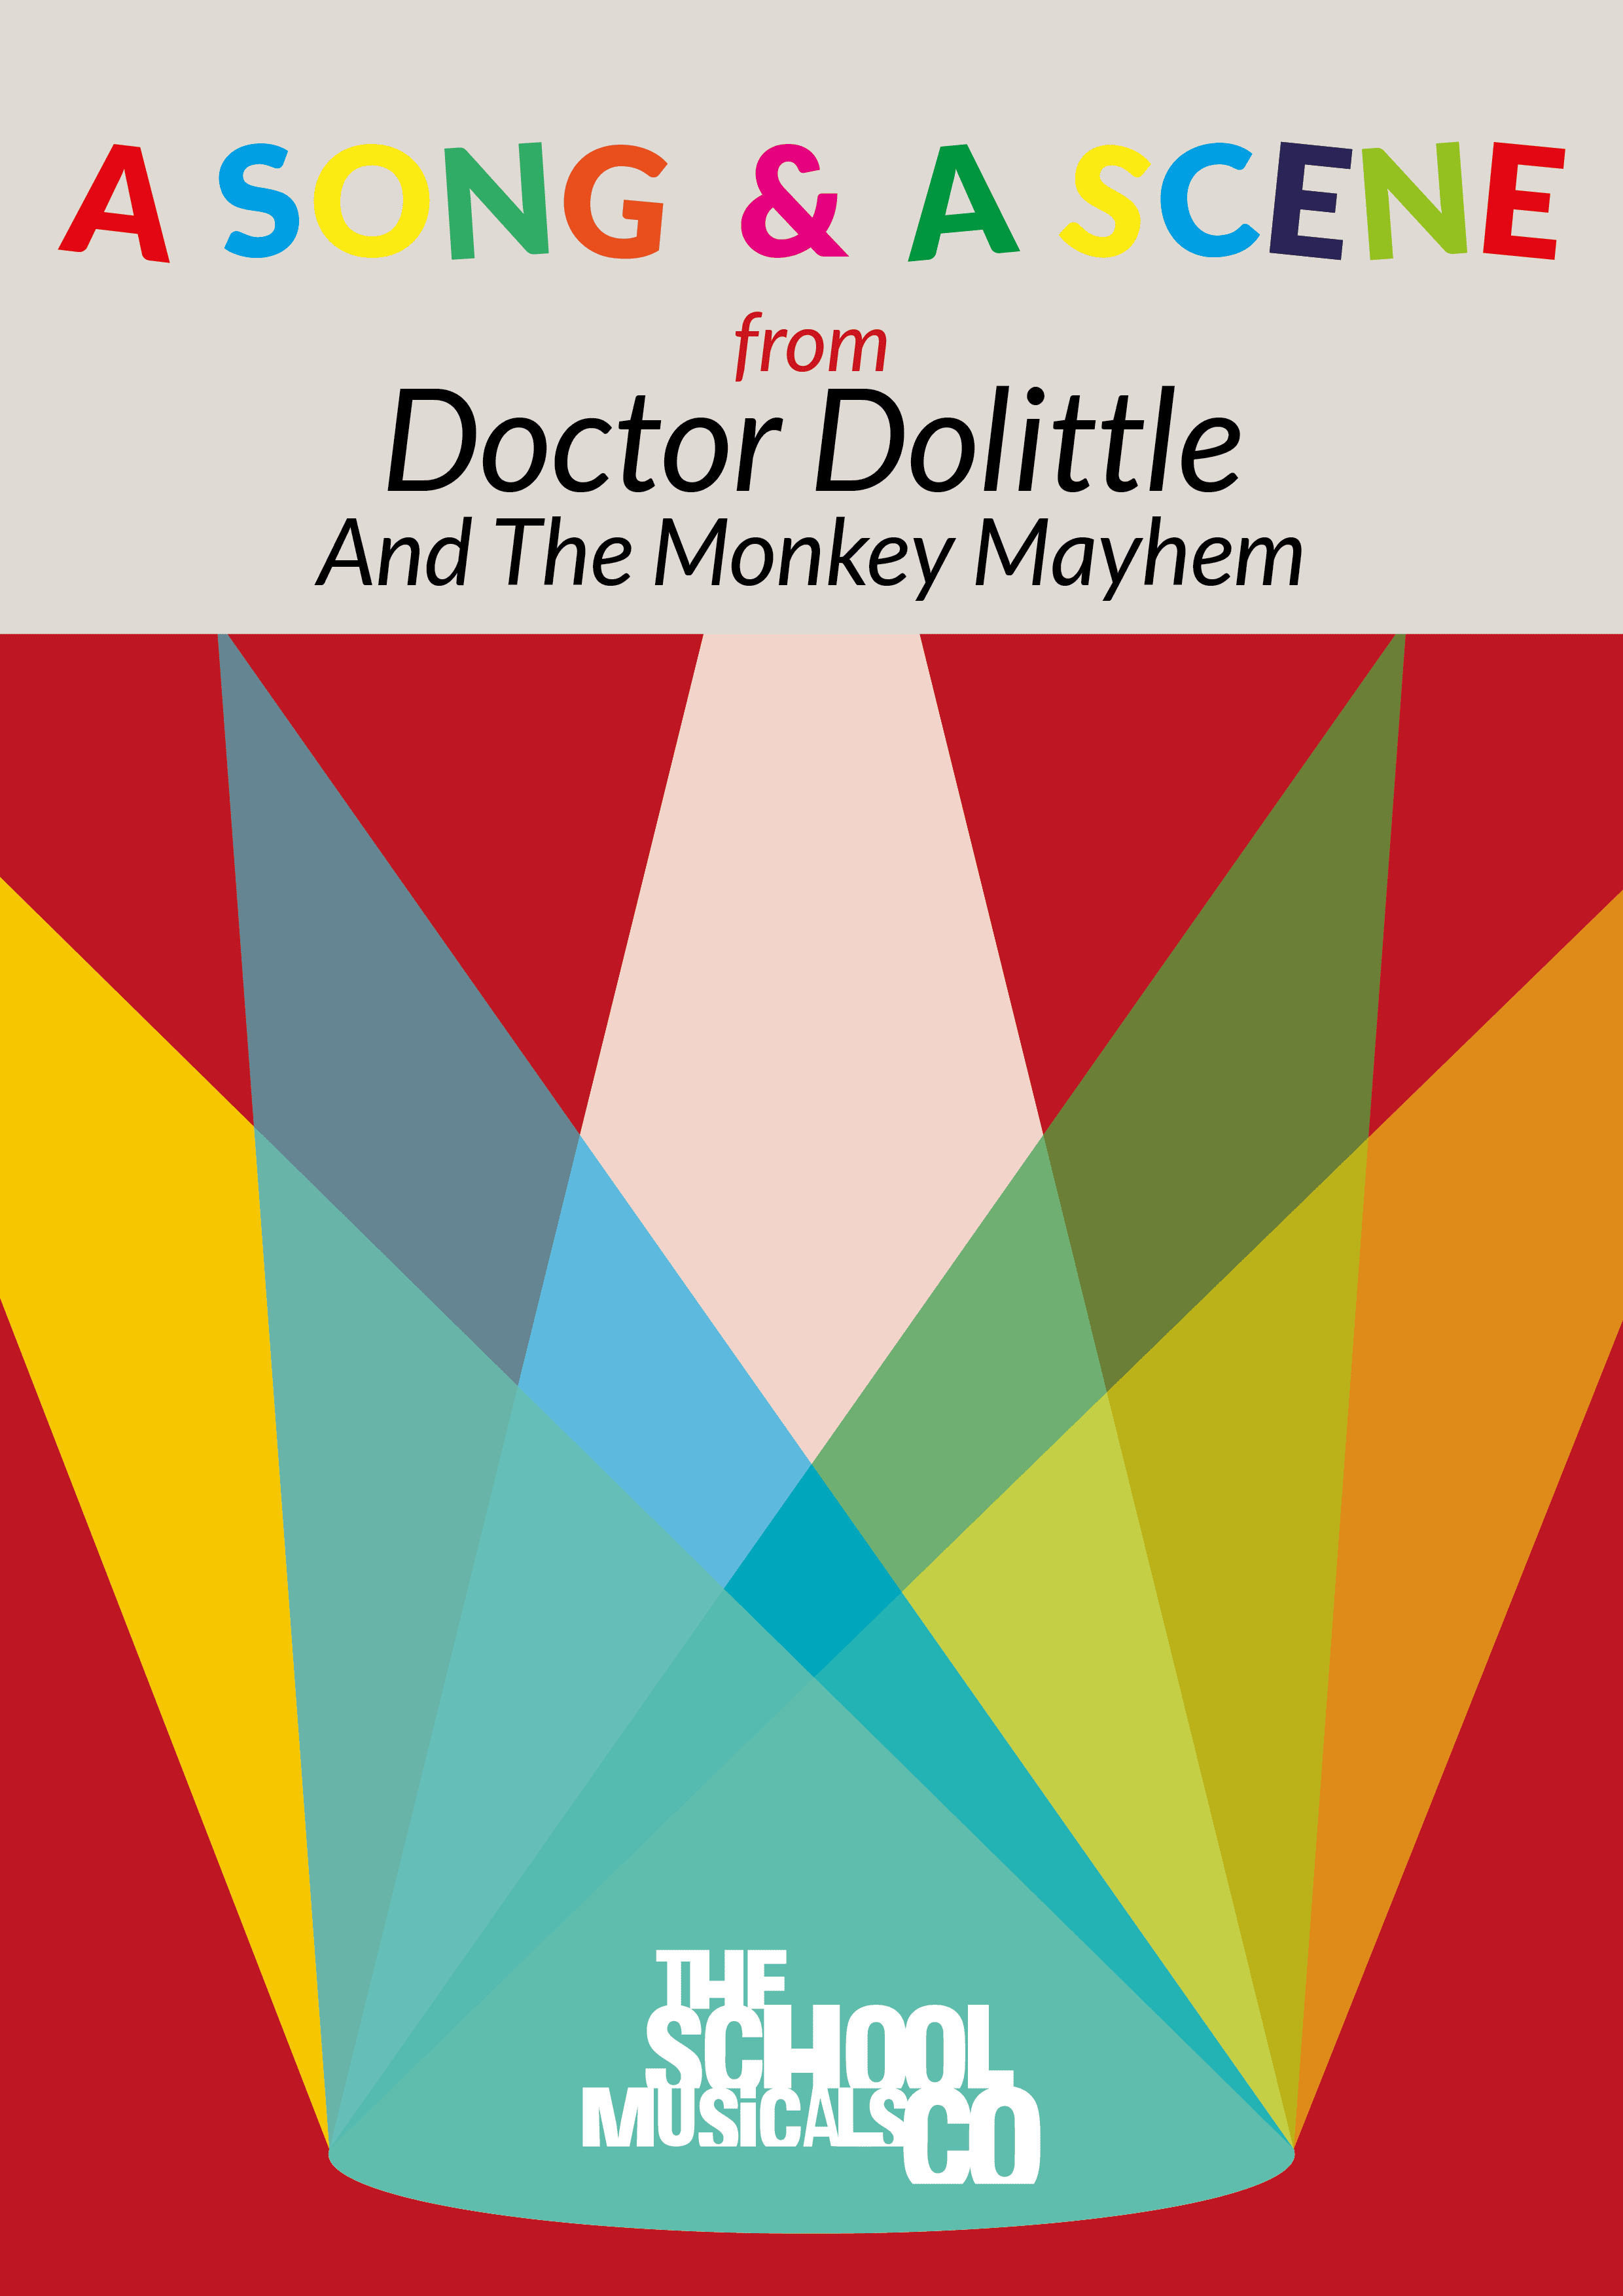 A Song & A Scene from Doctor Dolittle And The Monkey Mayhem